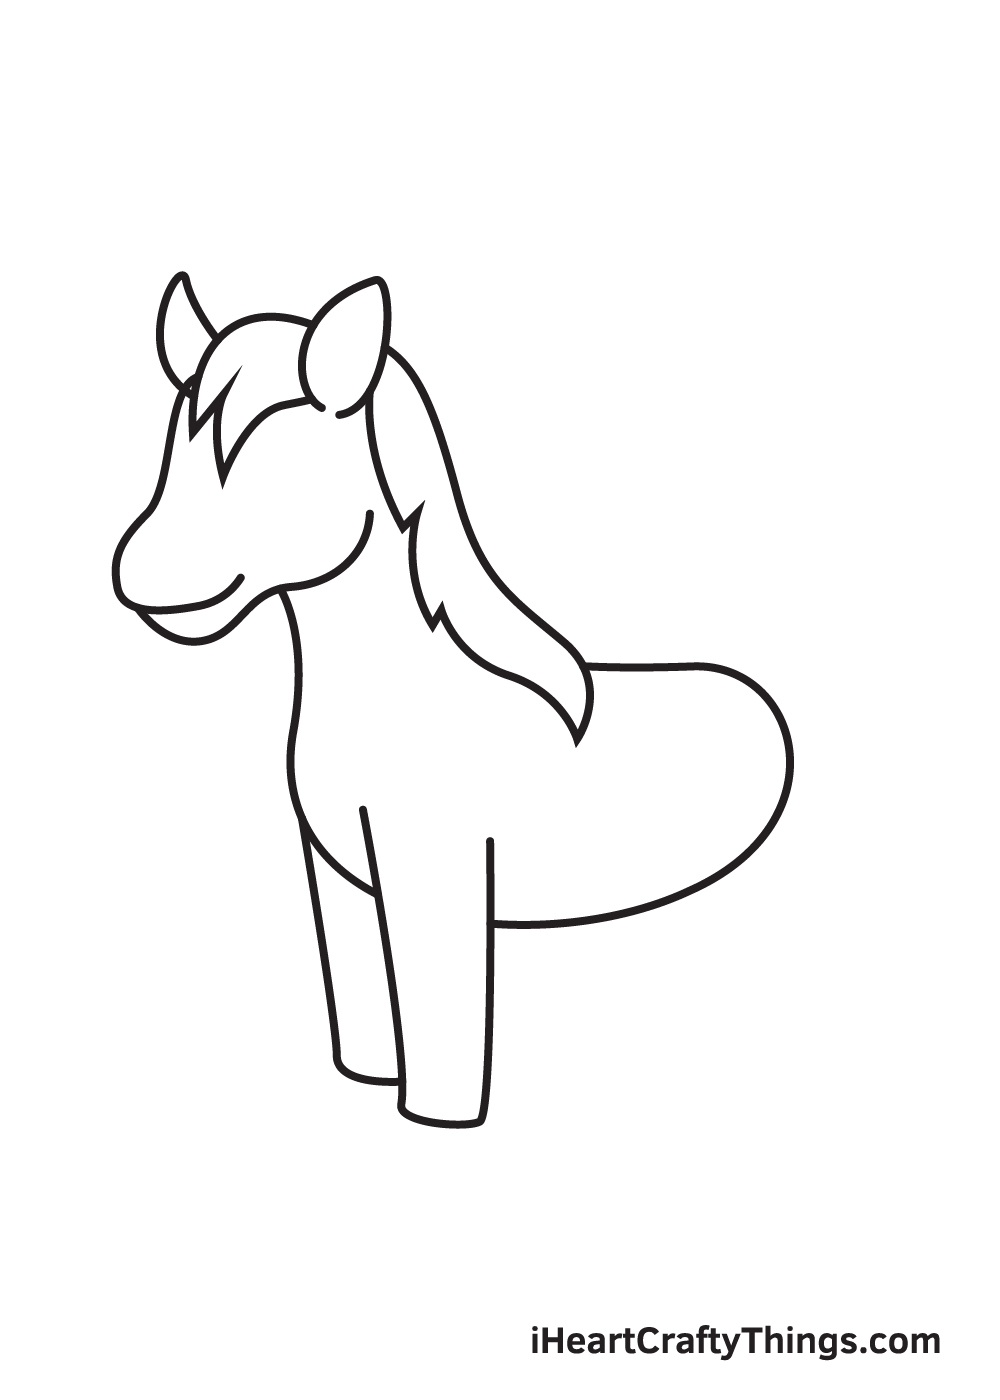 Horse Drawing — How To Draw A Horse Step By Step